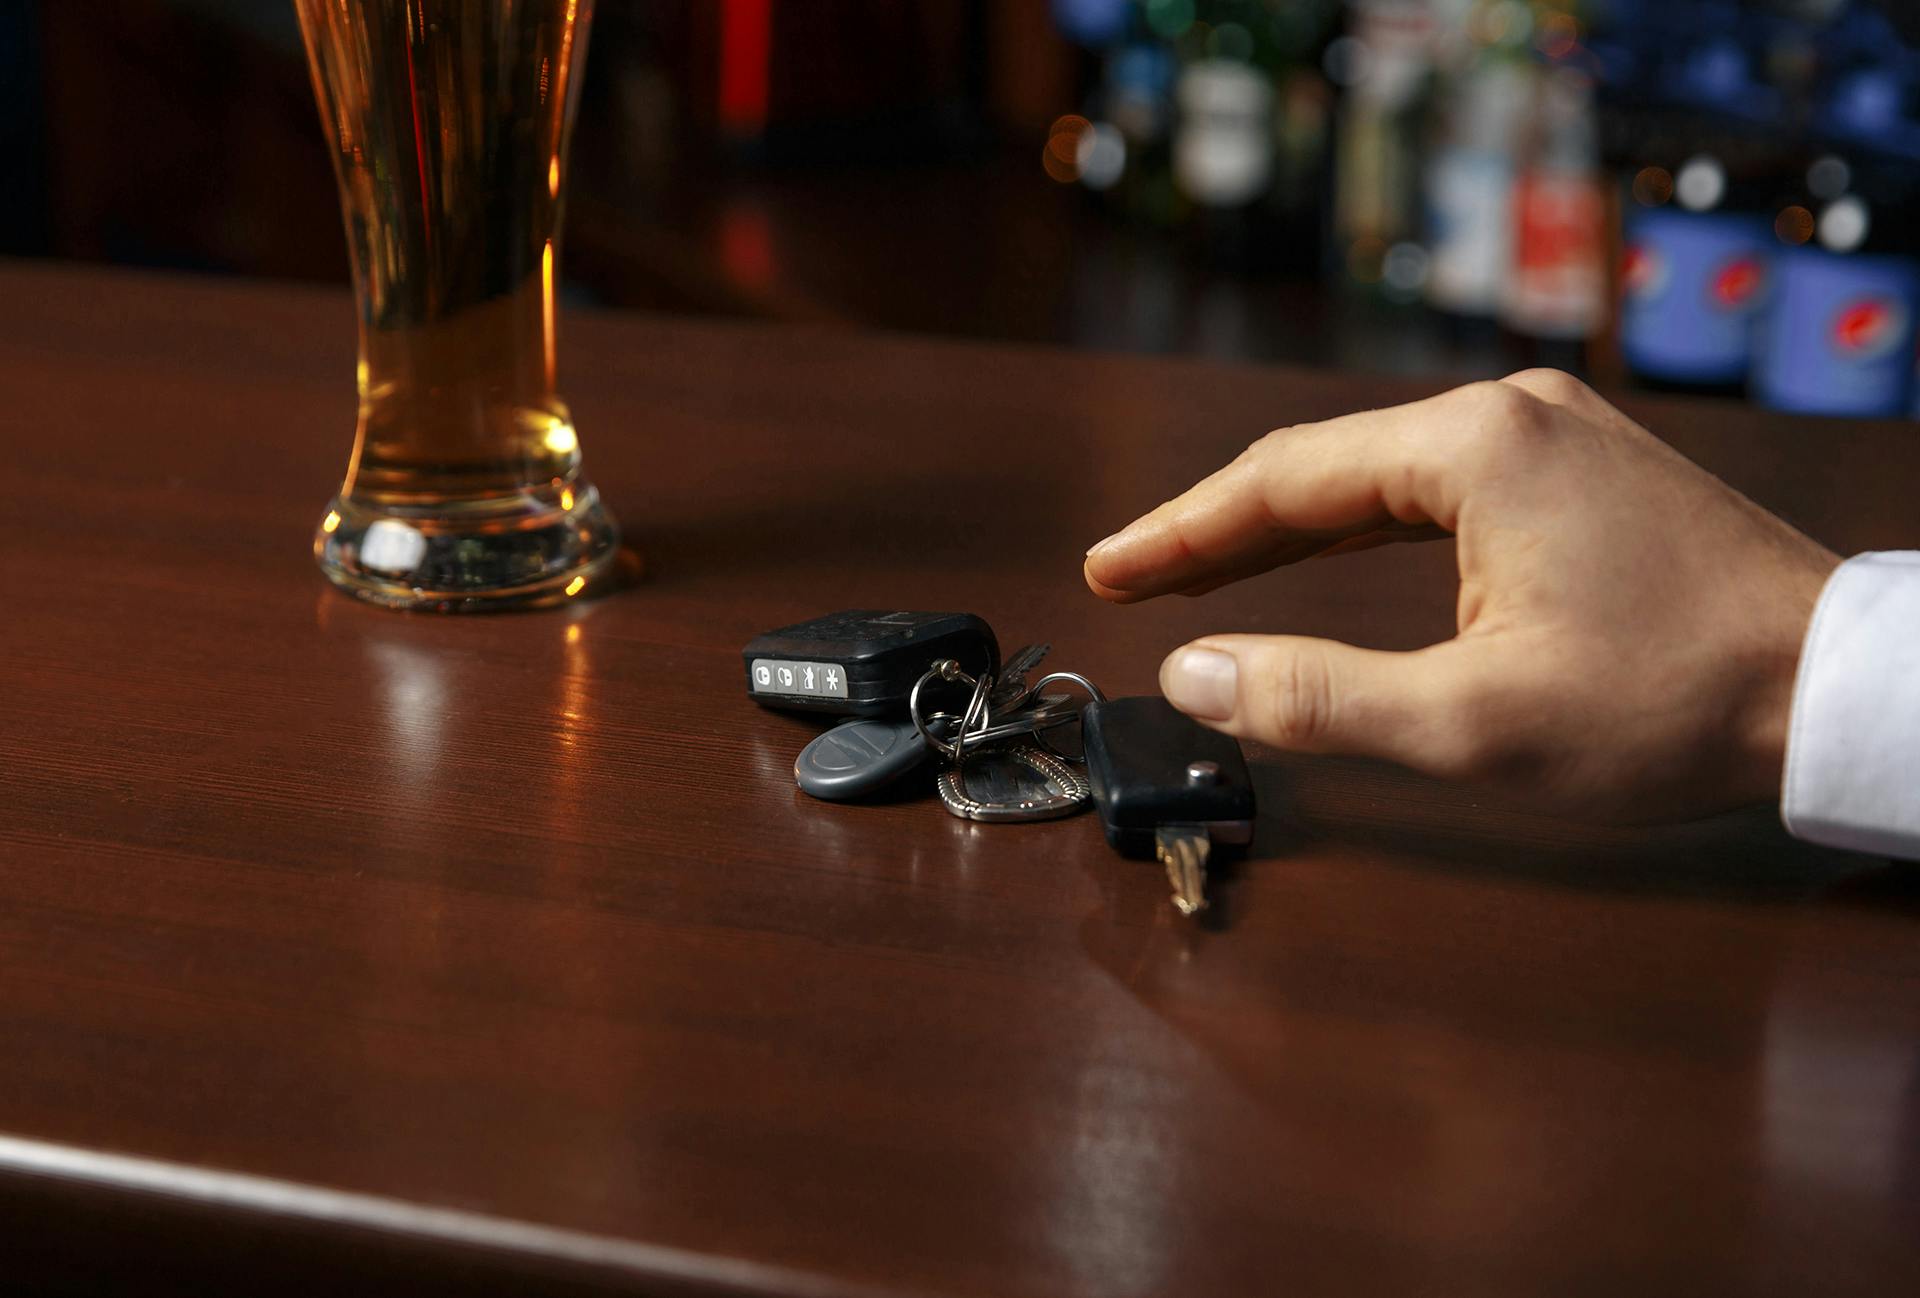 Person reaching for keys next to alcoholic beverage